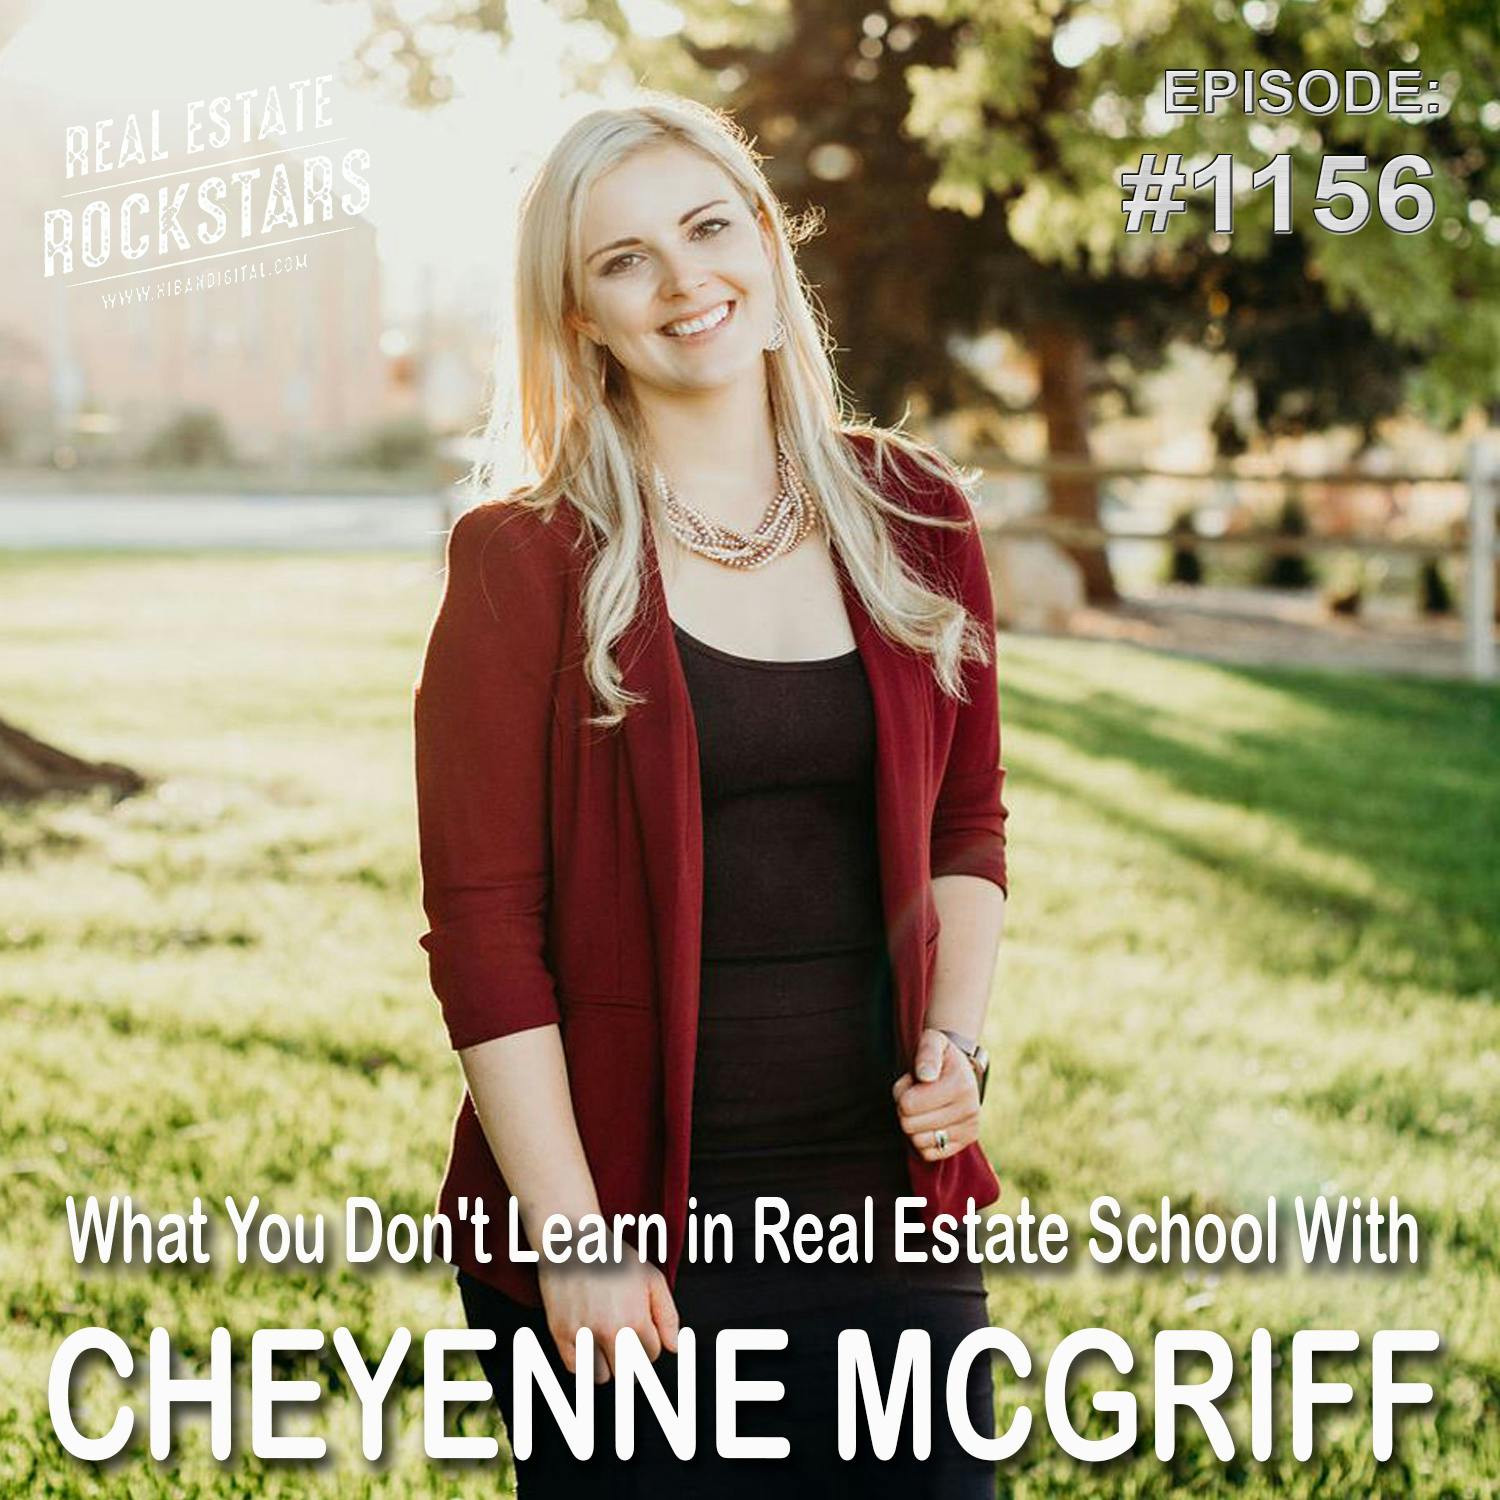 1156: What You Don't Learn in Real Estate School With Cheyenne McGriff